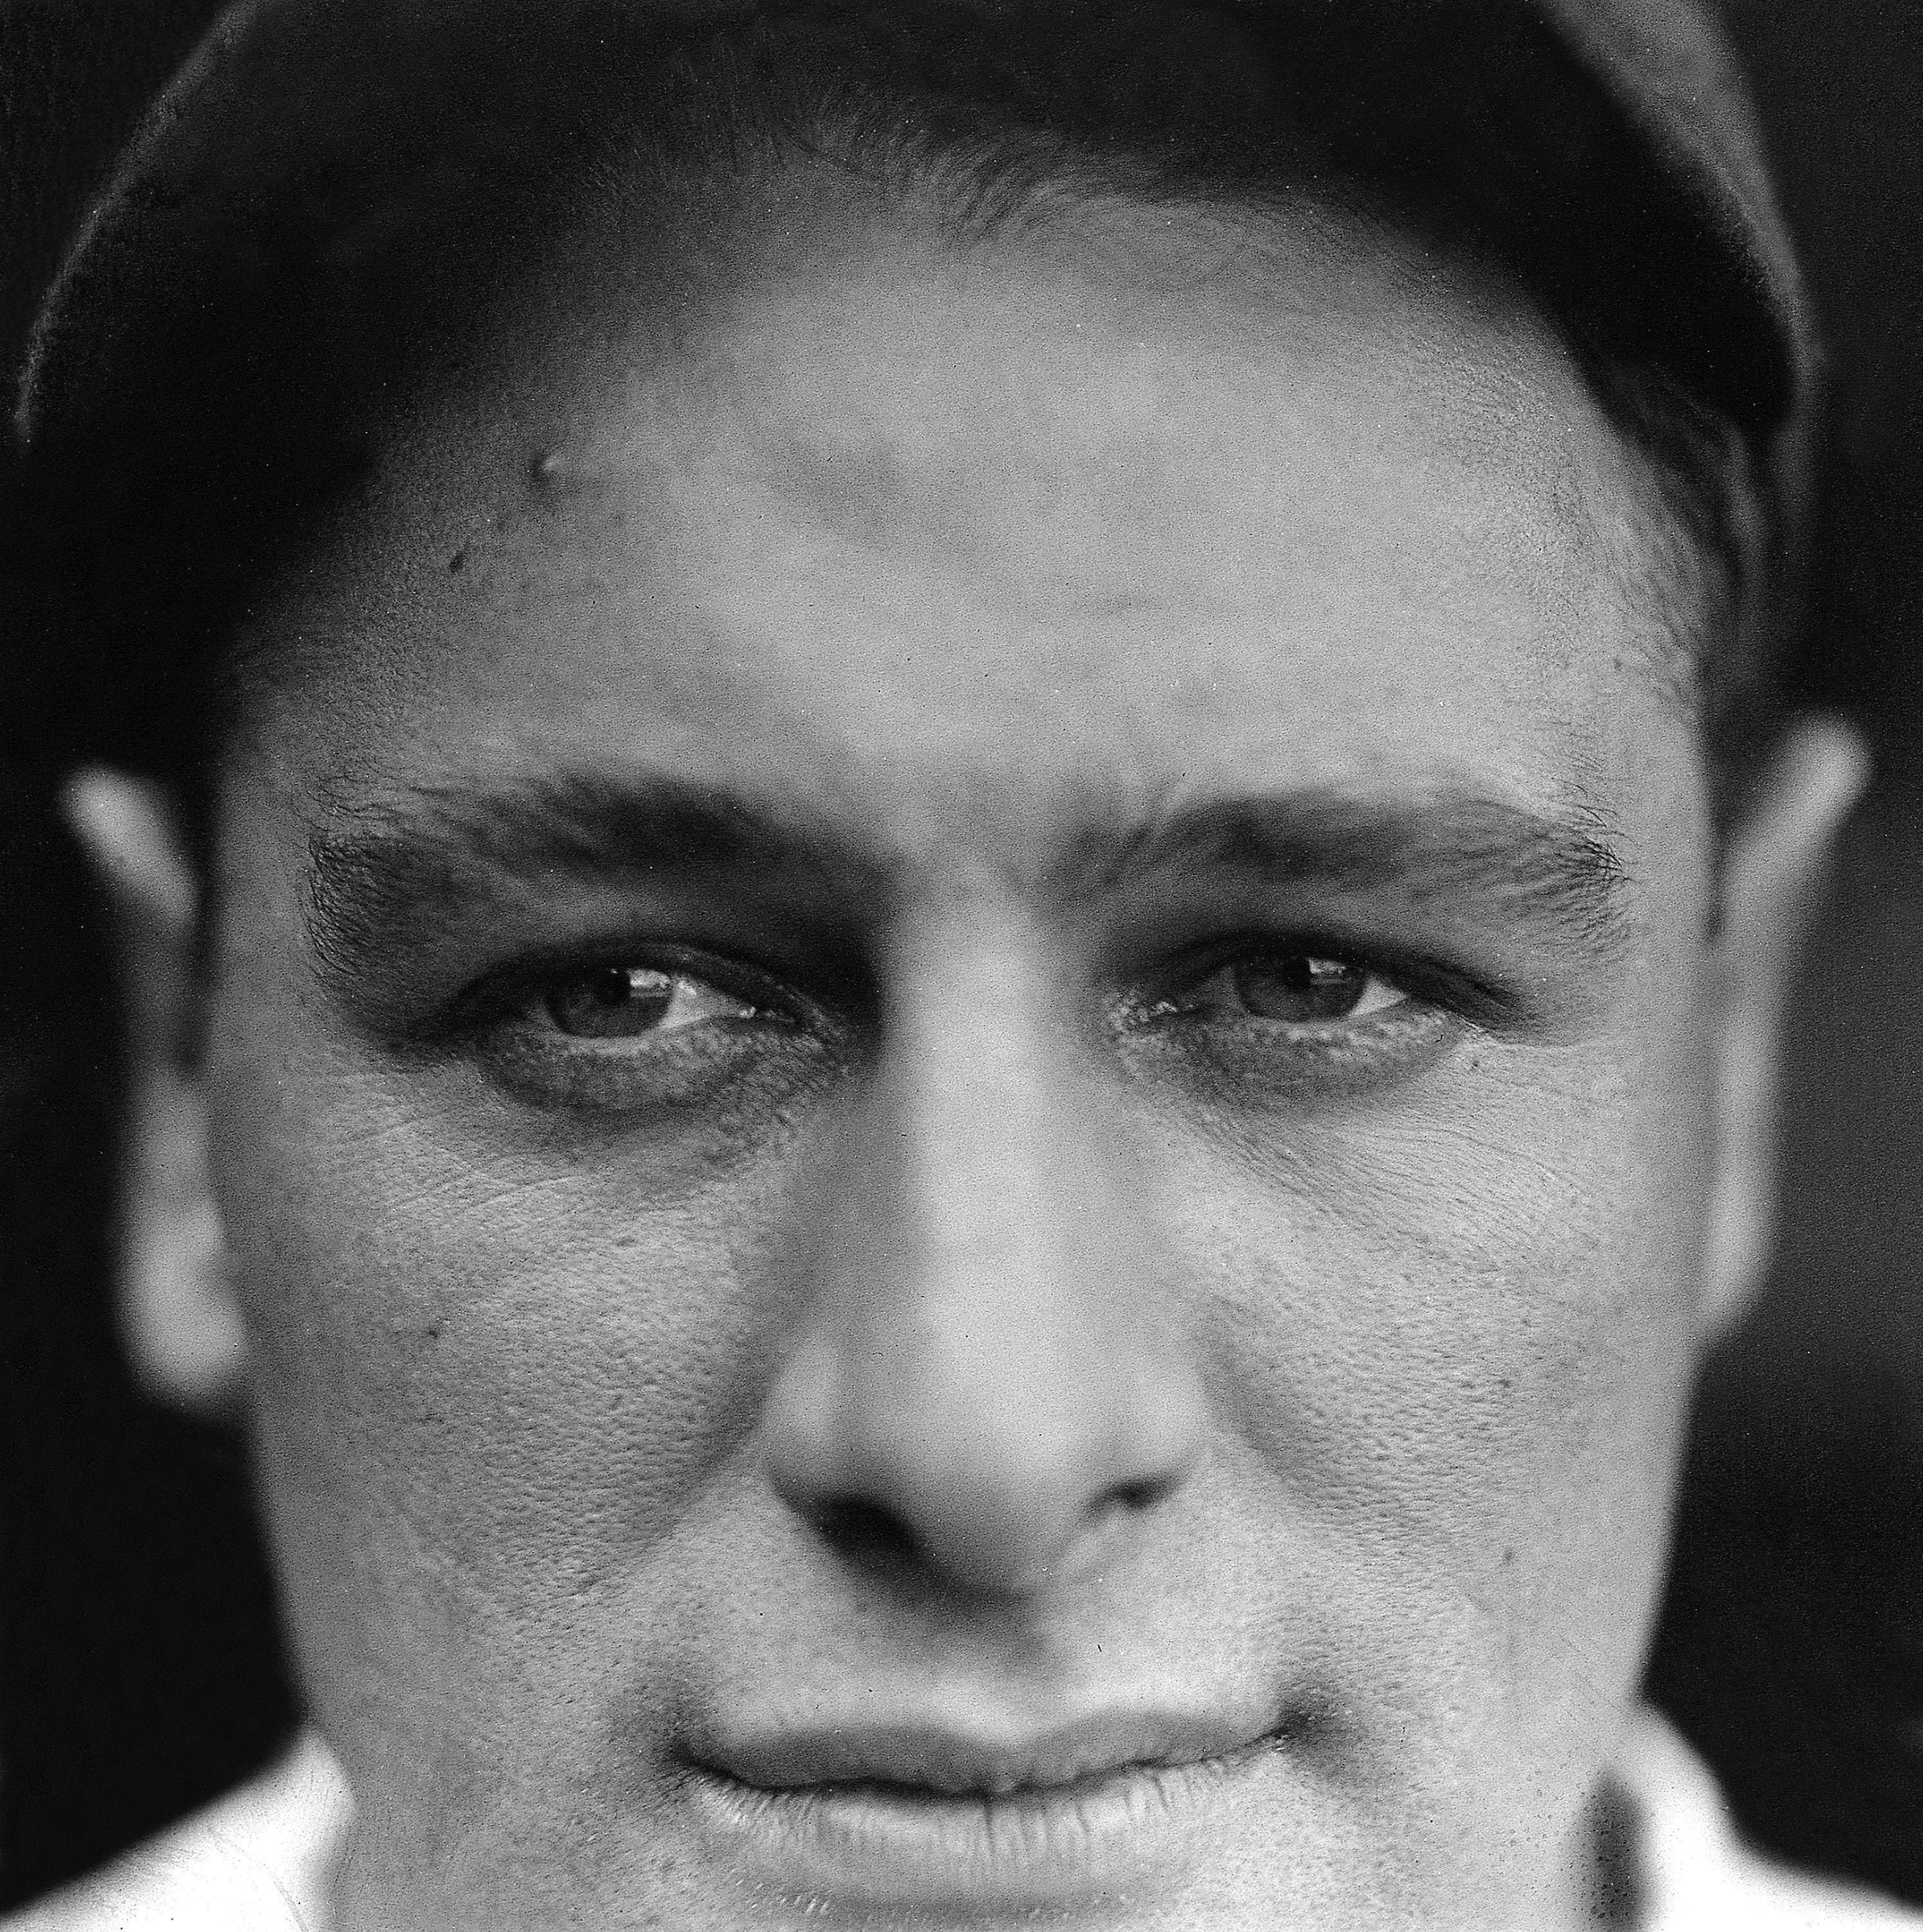 The Good Boy of Baseball: The final days of Lou Gehrig - The Athletic